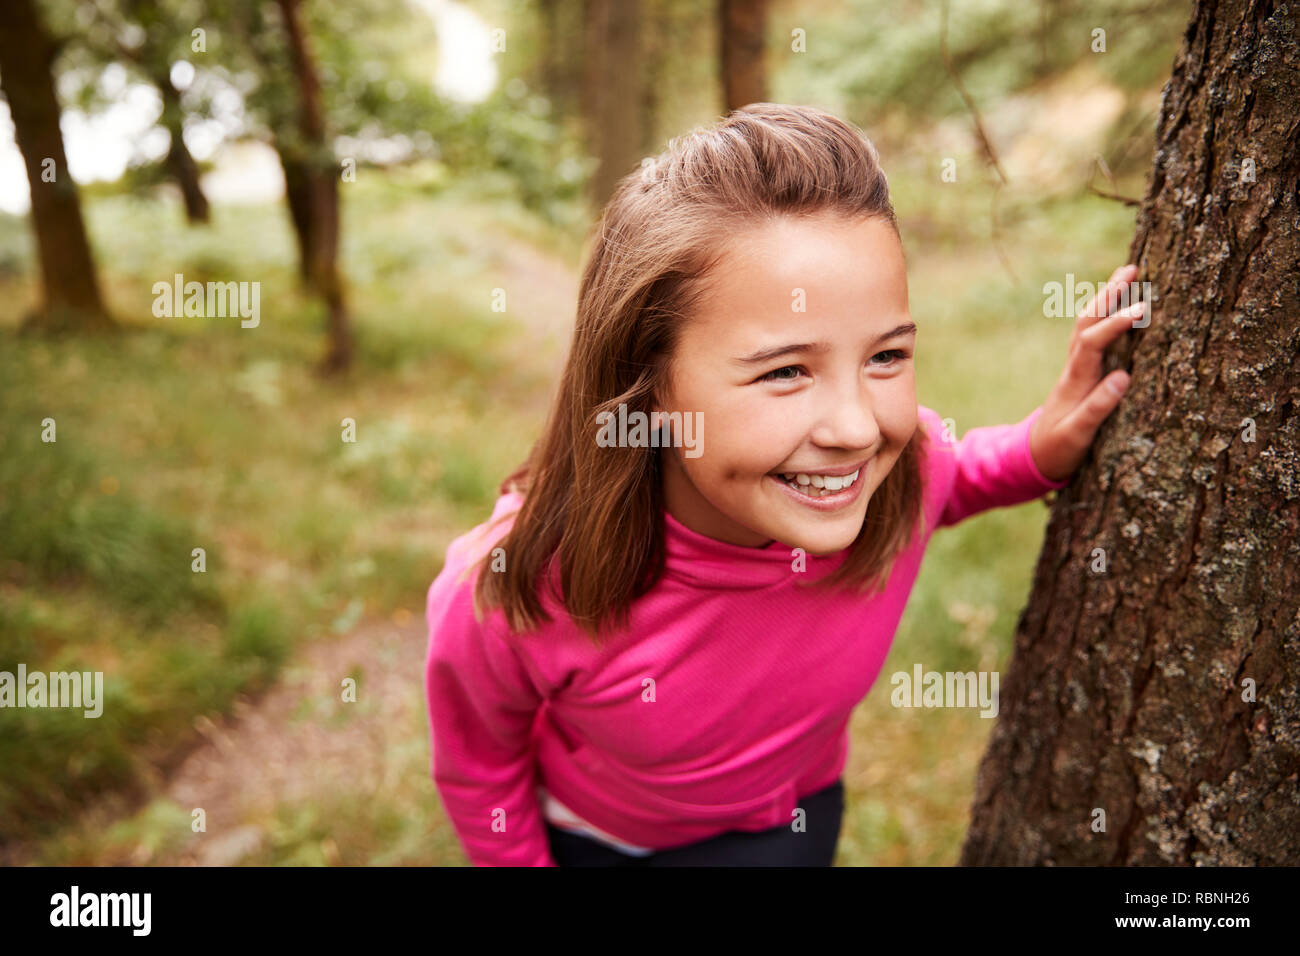 Pre-teen girl taking a break leaning on tree during a hike in a forest, elevated view, close up Stock Photo